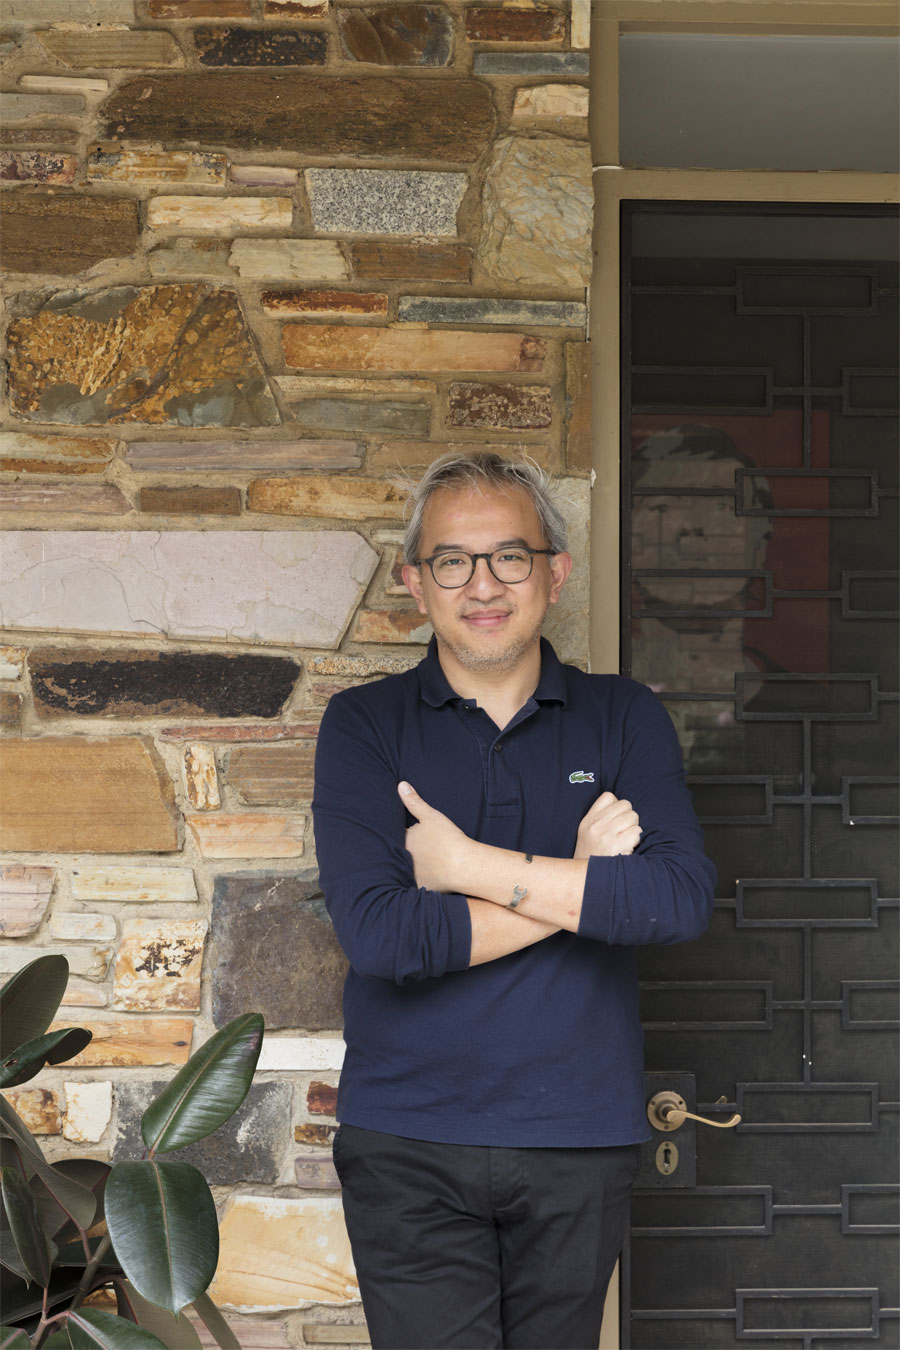 Albert Mo, director at Architects EAT, is featured At Home in inside 98. Photo by Dianna Snape.